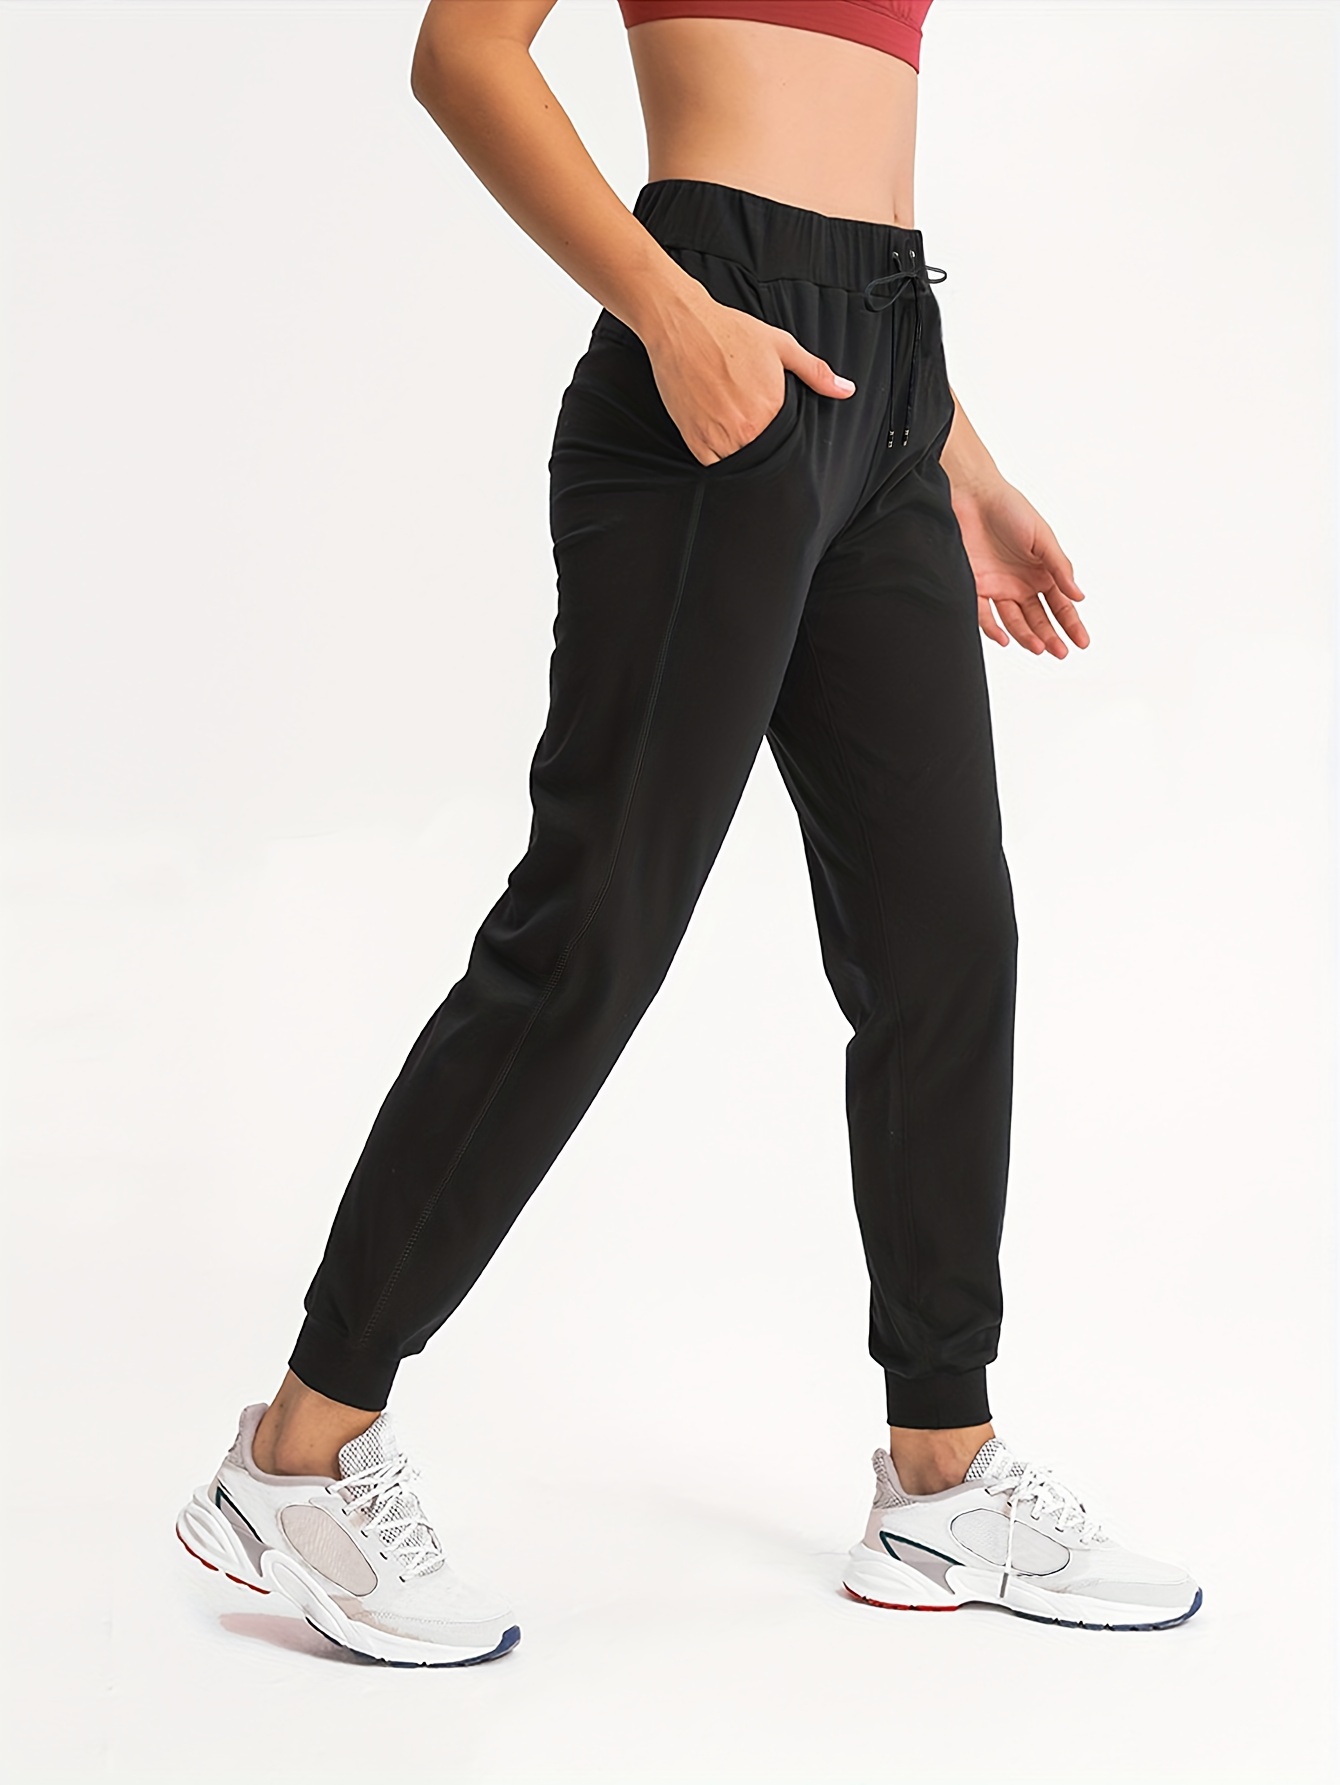 Women's High Waisted Yoga Pants Loose Fit Stretchy Sports Pants